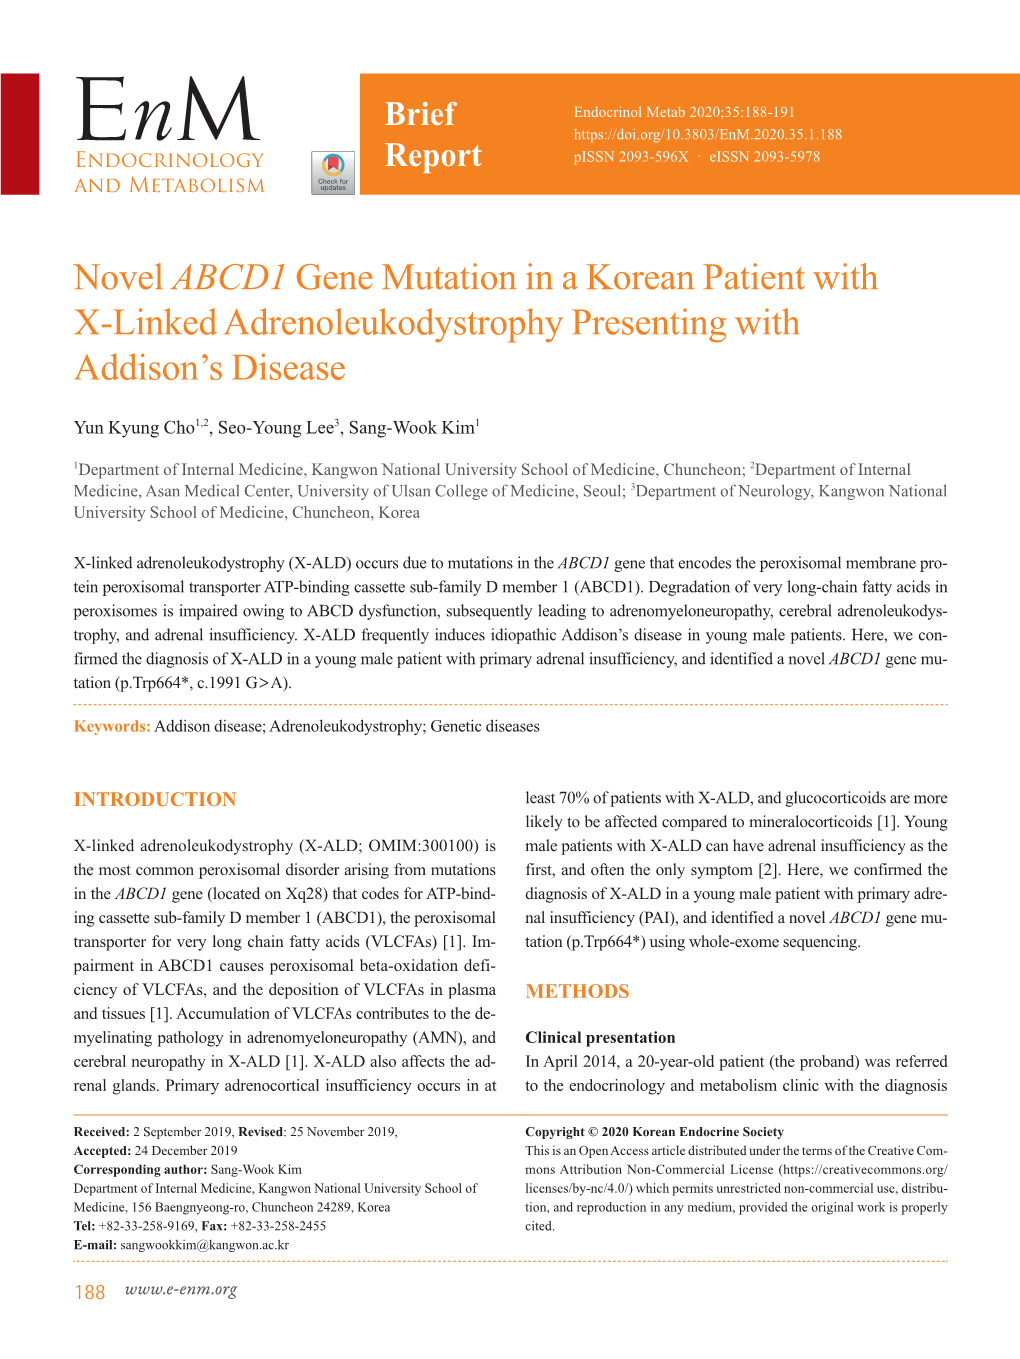 Novel ABCD1 Gene Mutation in a Korean Patient with X-Linked Adrenoleukodystrophy Presenting with Addison’S Disease